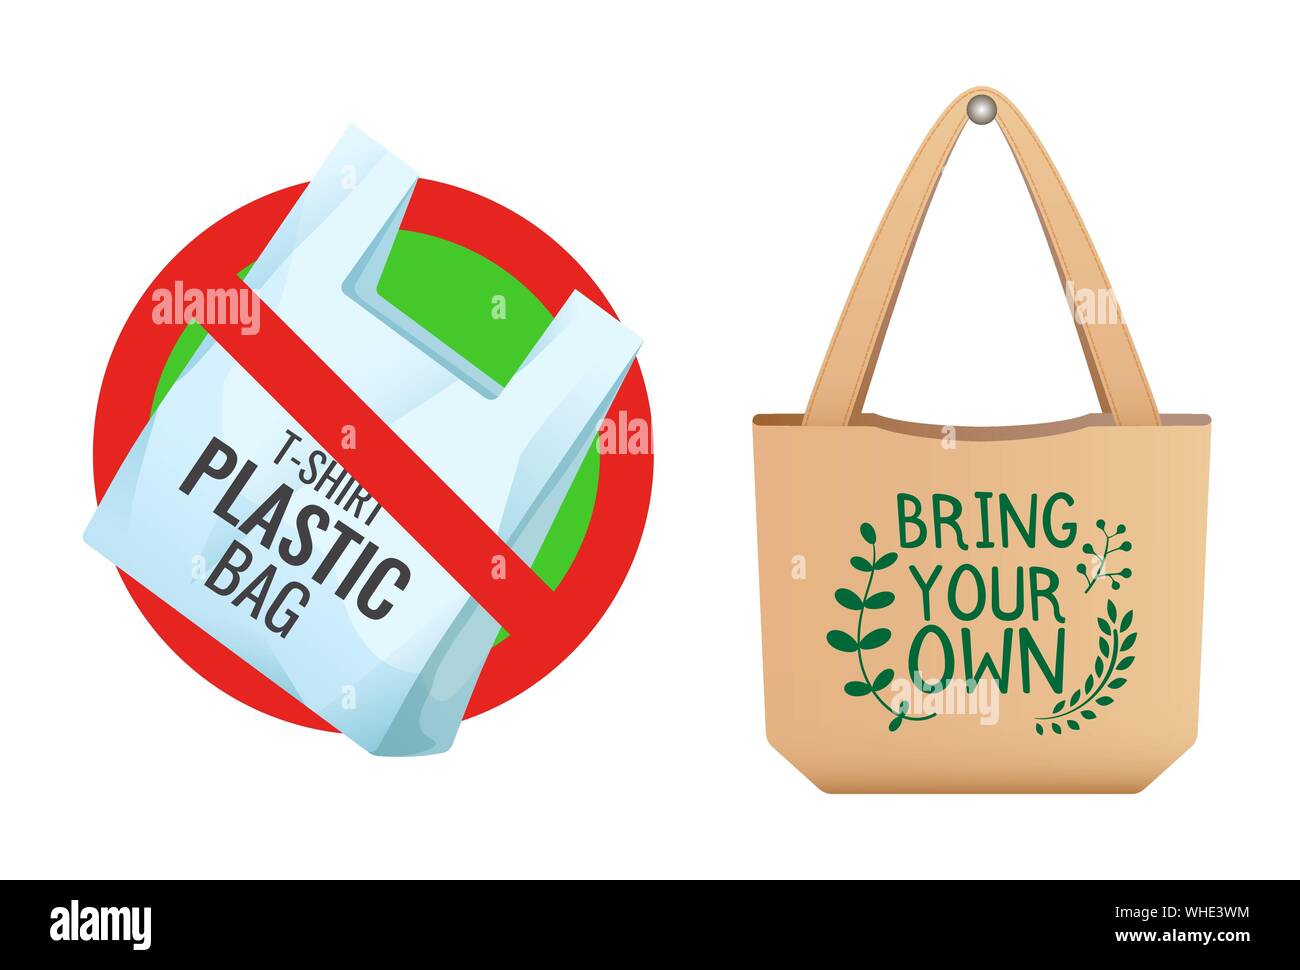 Plastic bag prohibited, crossed out bag icon, no plastic and Brown linen eco bag with sign Bring your own, care about environment vector illustration Stock Vector